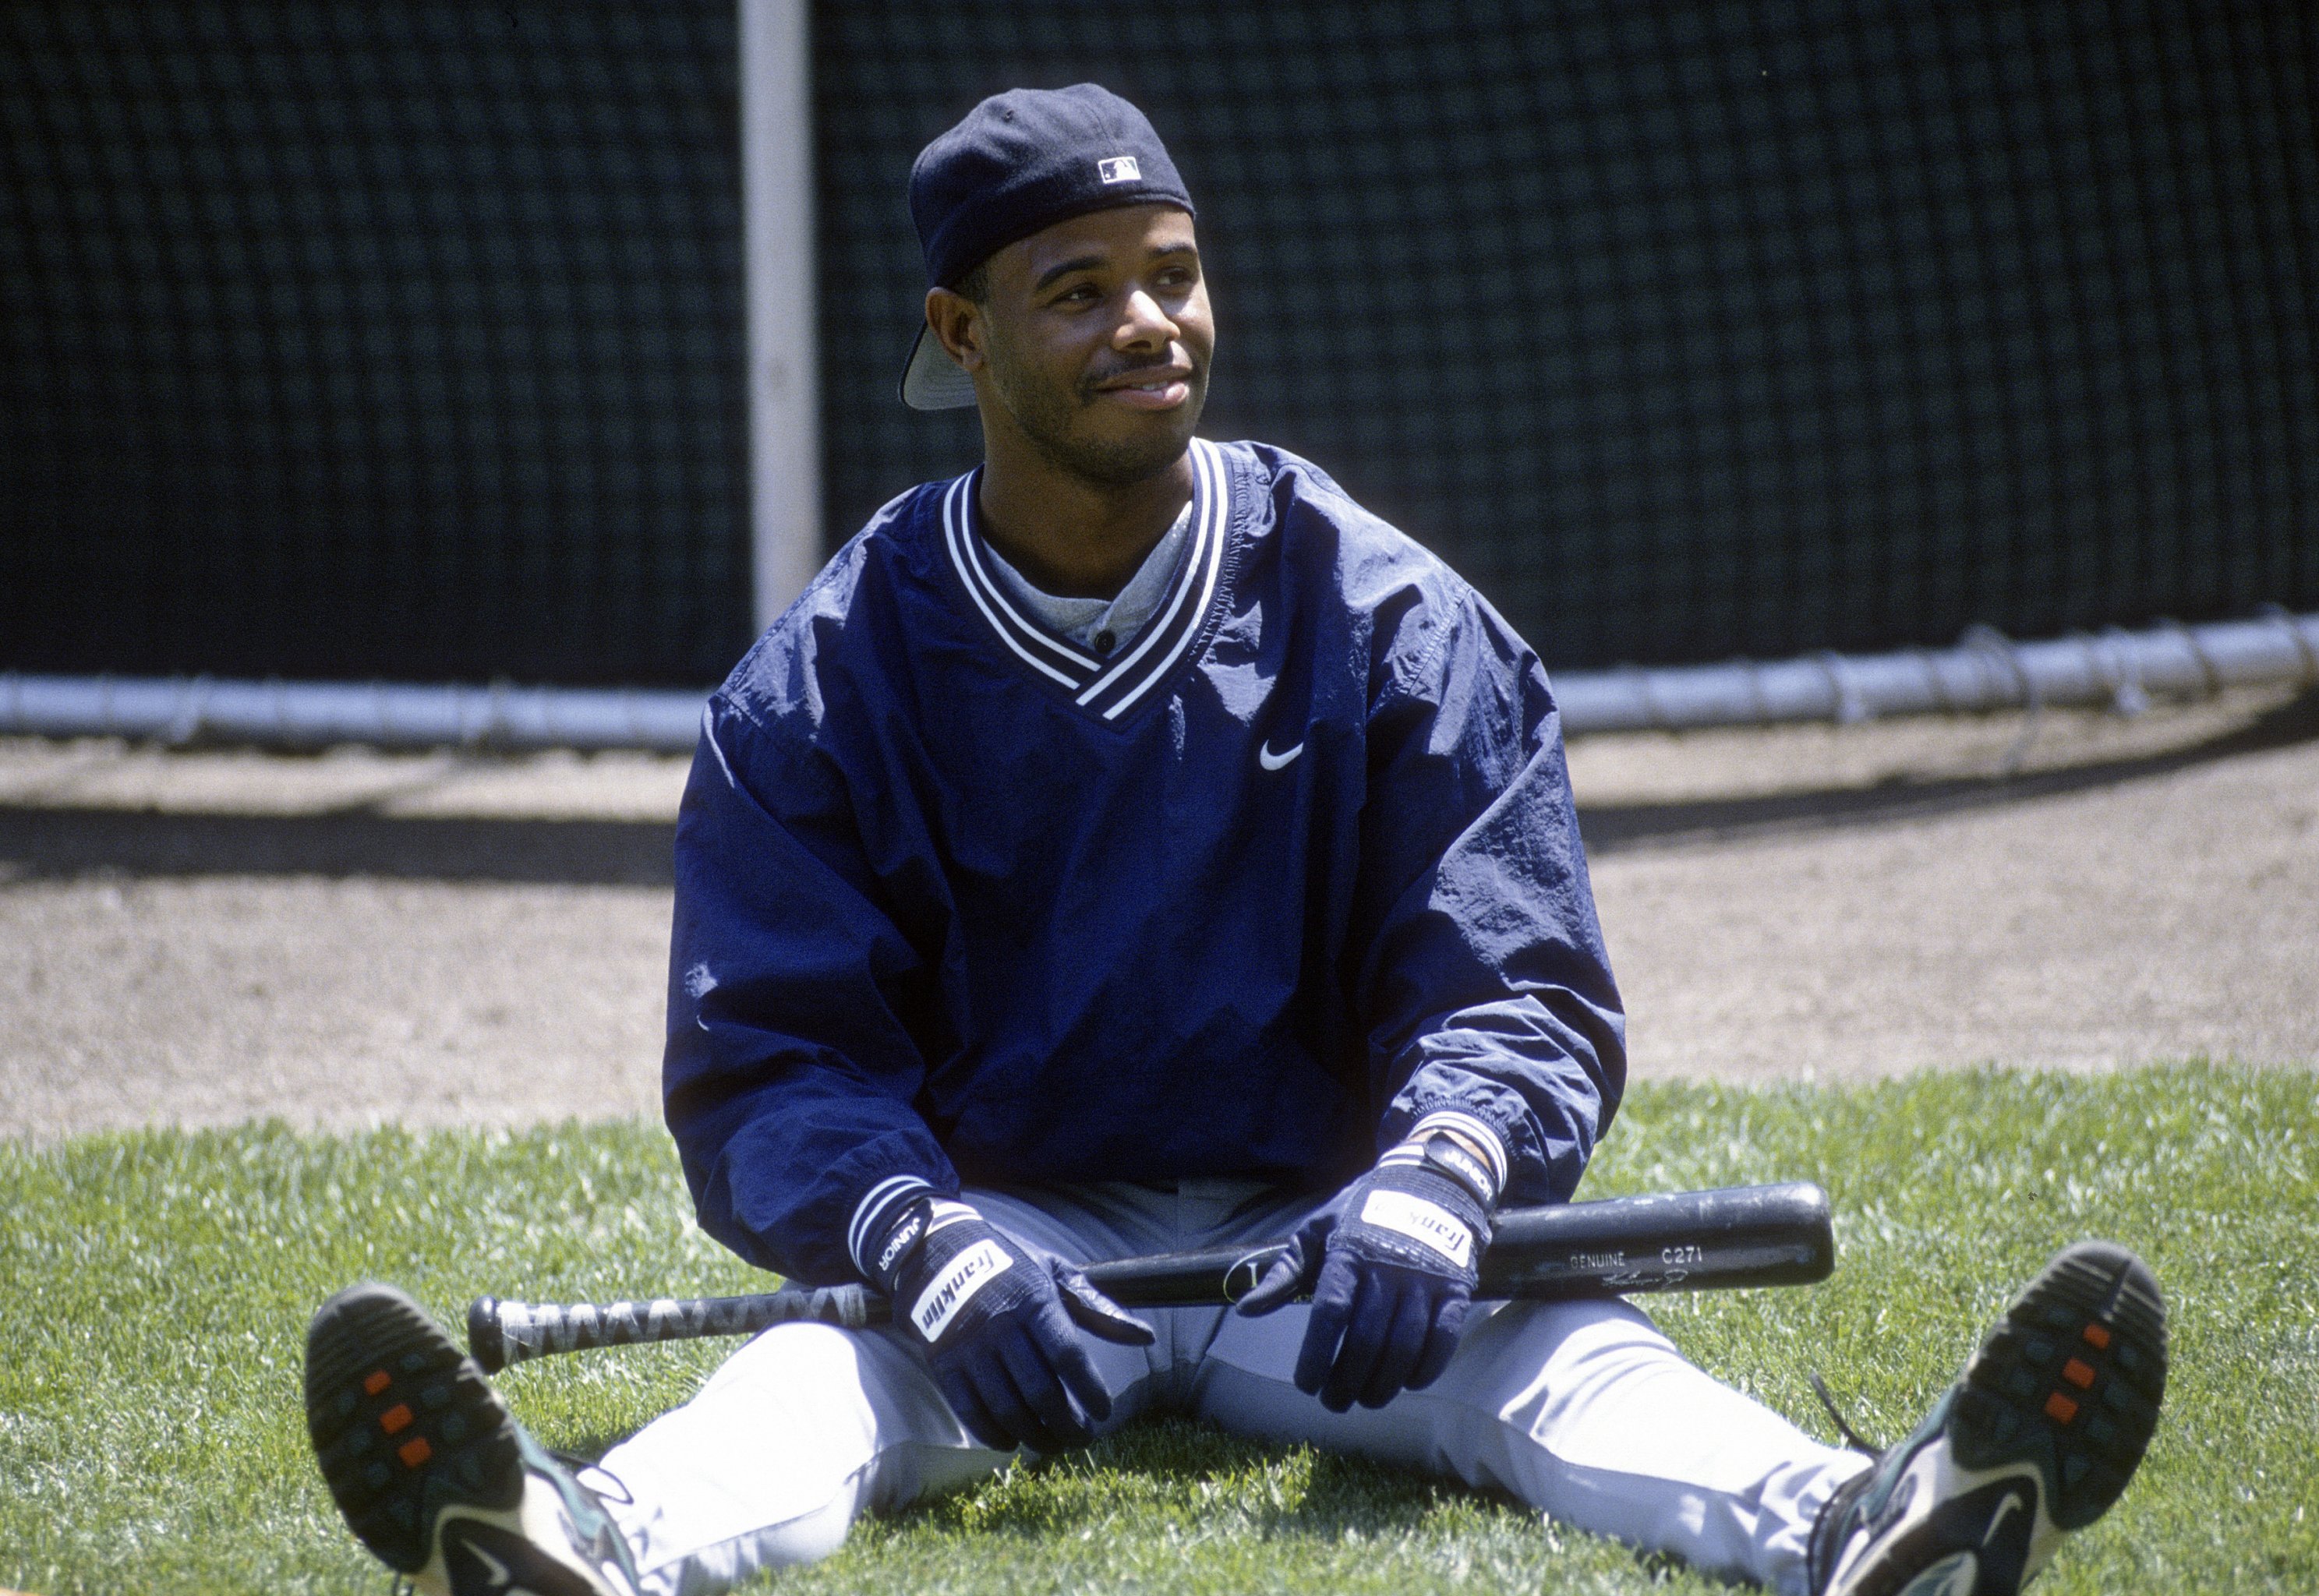 Ken Griffey Jr.'s top 5 moments as a Red